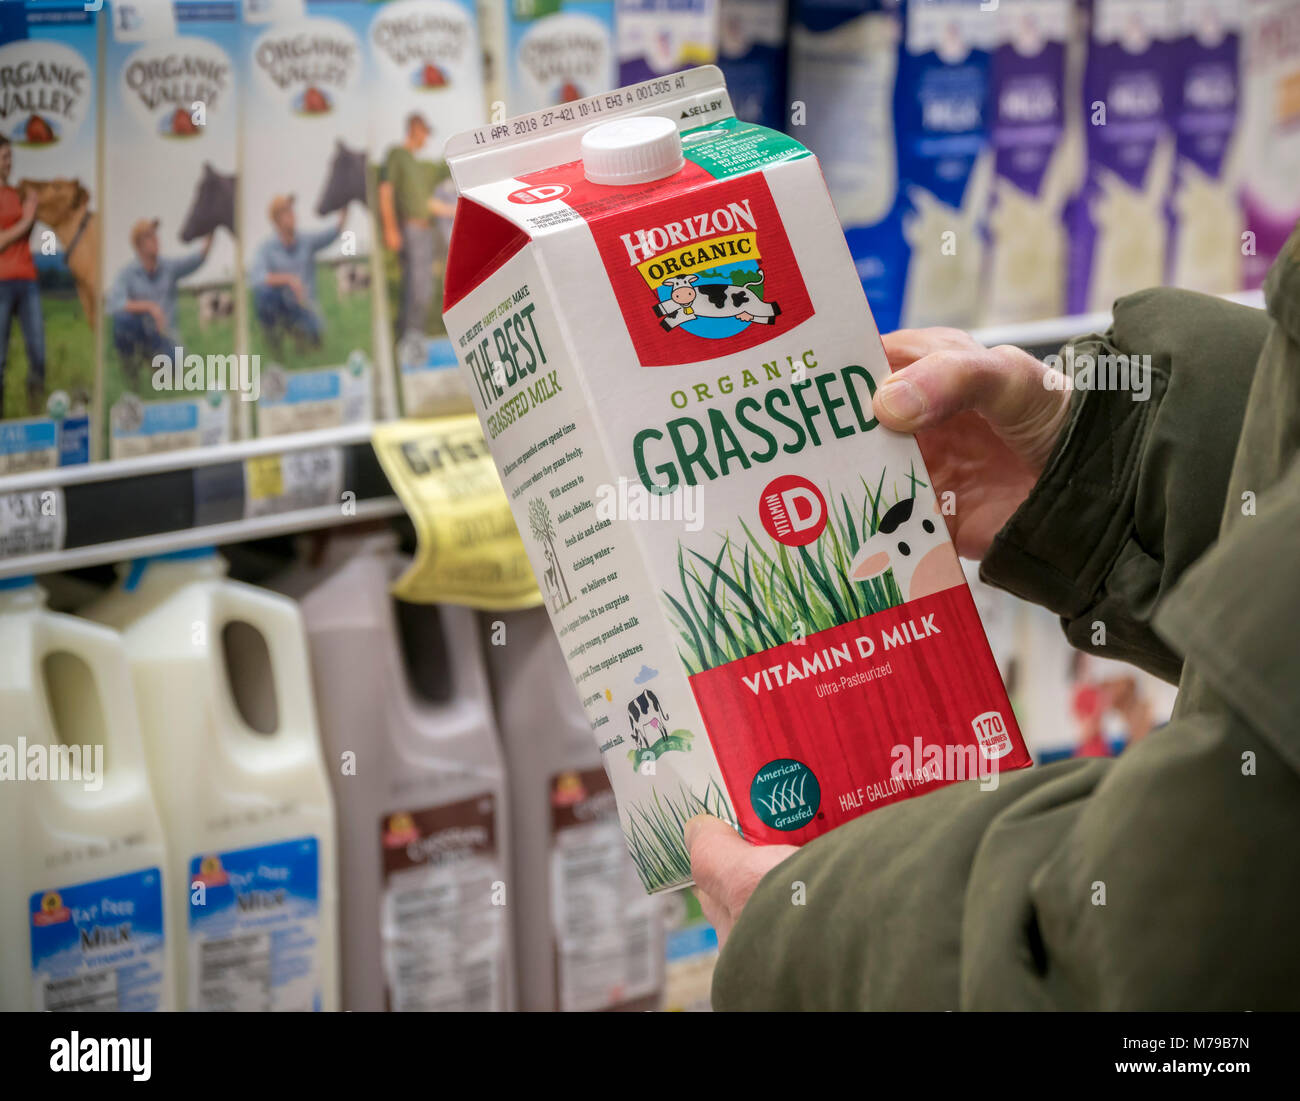 A customer chooses a half-gallon container of Horizon brand organic  grassfed milk in a supermarket in New York on Monday, March 5, 2018.  Certified grassfed milk comes from cows that spend a